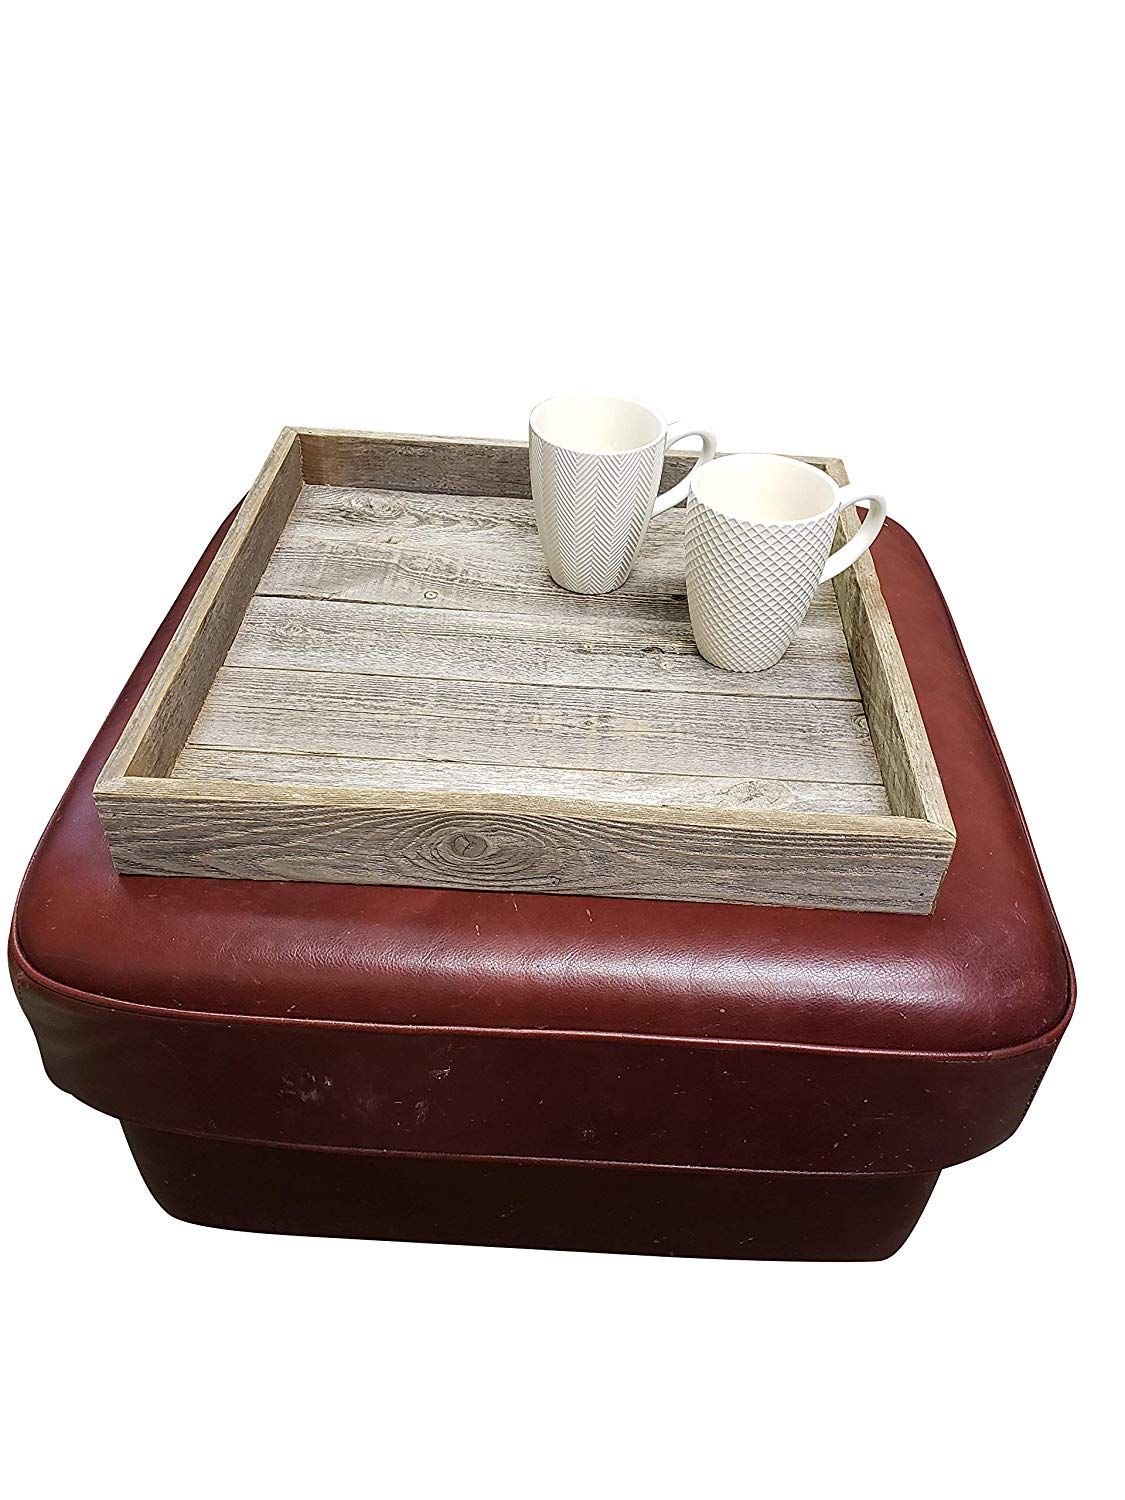 Ottoman Tray Made With Rustic Reclaimed Wood – Large Square Design For With Weathered Wood Ottomans (View 8 of 20)